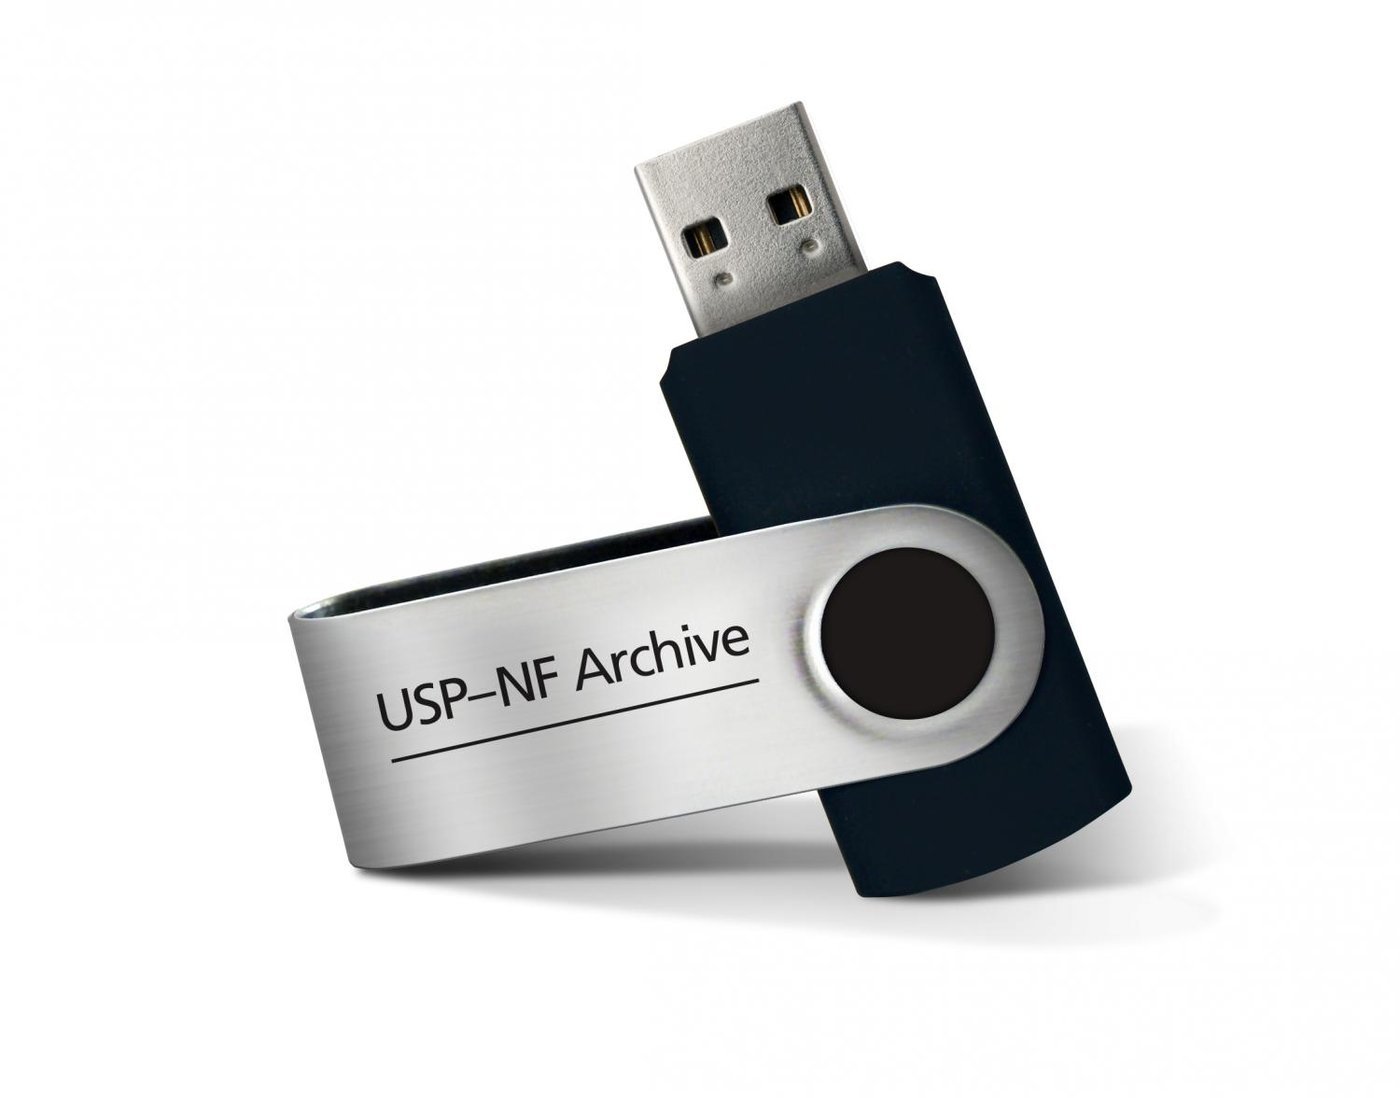 USP-NF Archive USP40-NF35
United States Pharmacopoeia and National Formulary
single user, USB-Stick